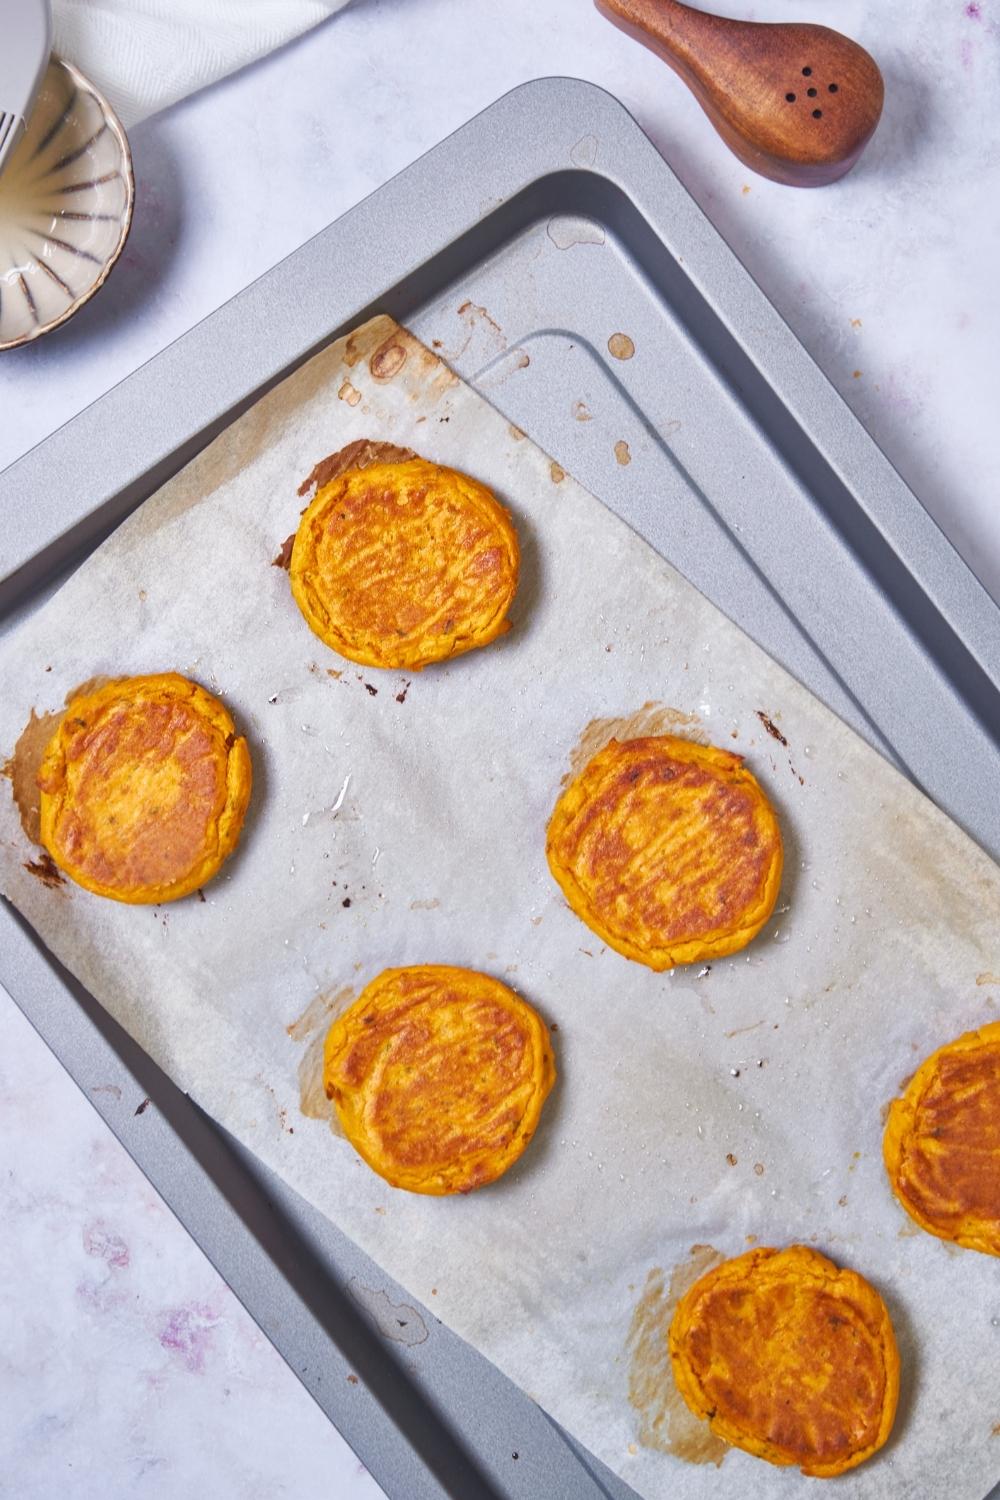 Sweet potato patties on a baking sheet lined with parchment paper.